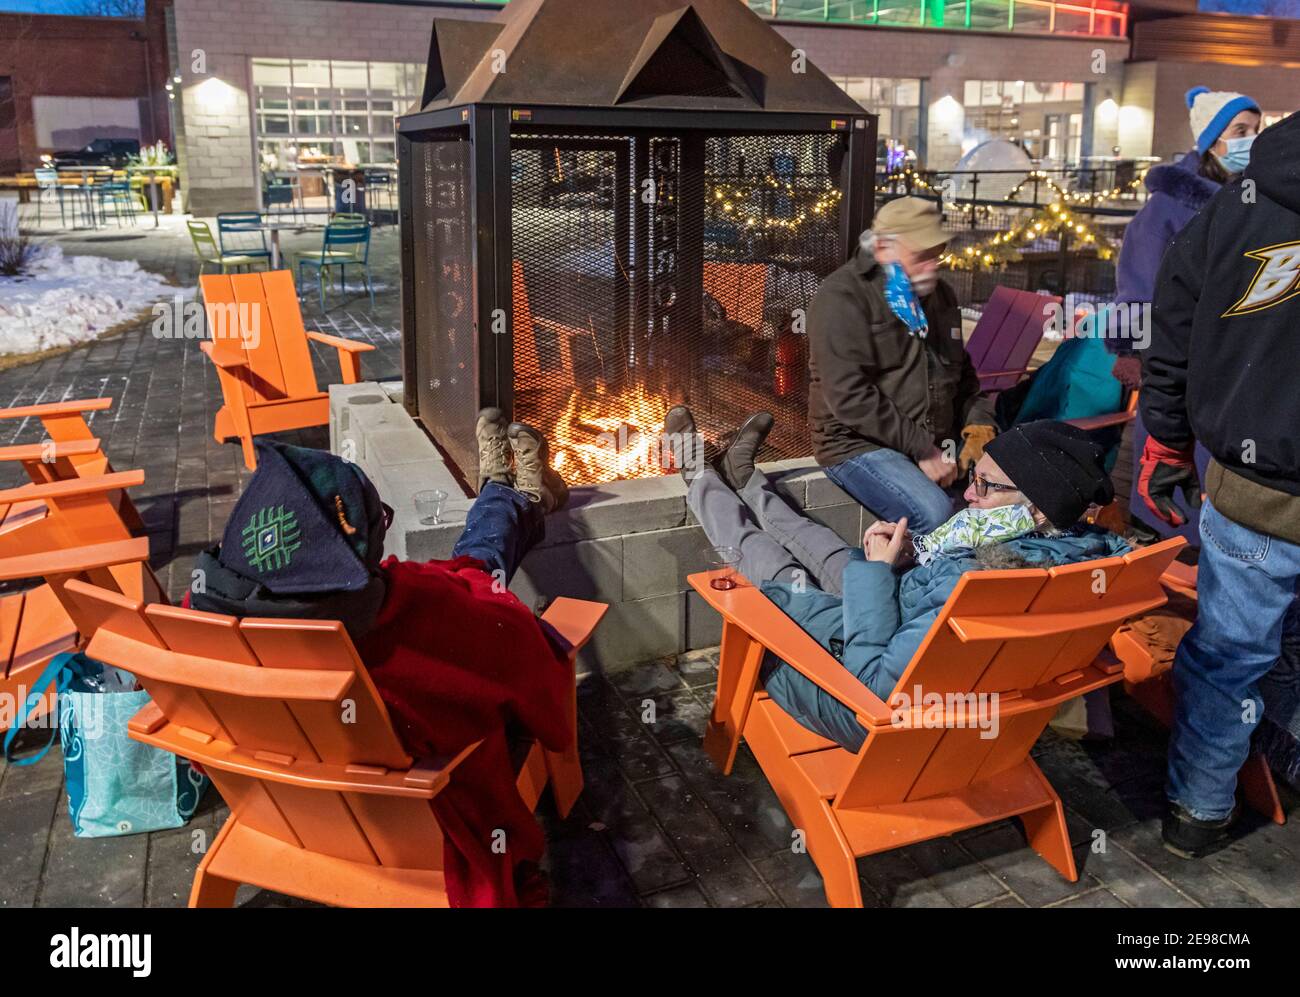 Detroit, Michigan - People sit around a fire at Robert C. Valade Park on the east riverfront. The park, part of the Detroit Riverfront Conservancy, pr Stock Photo